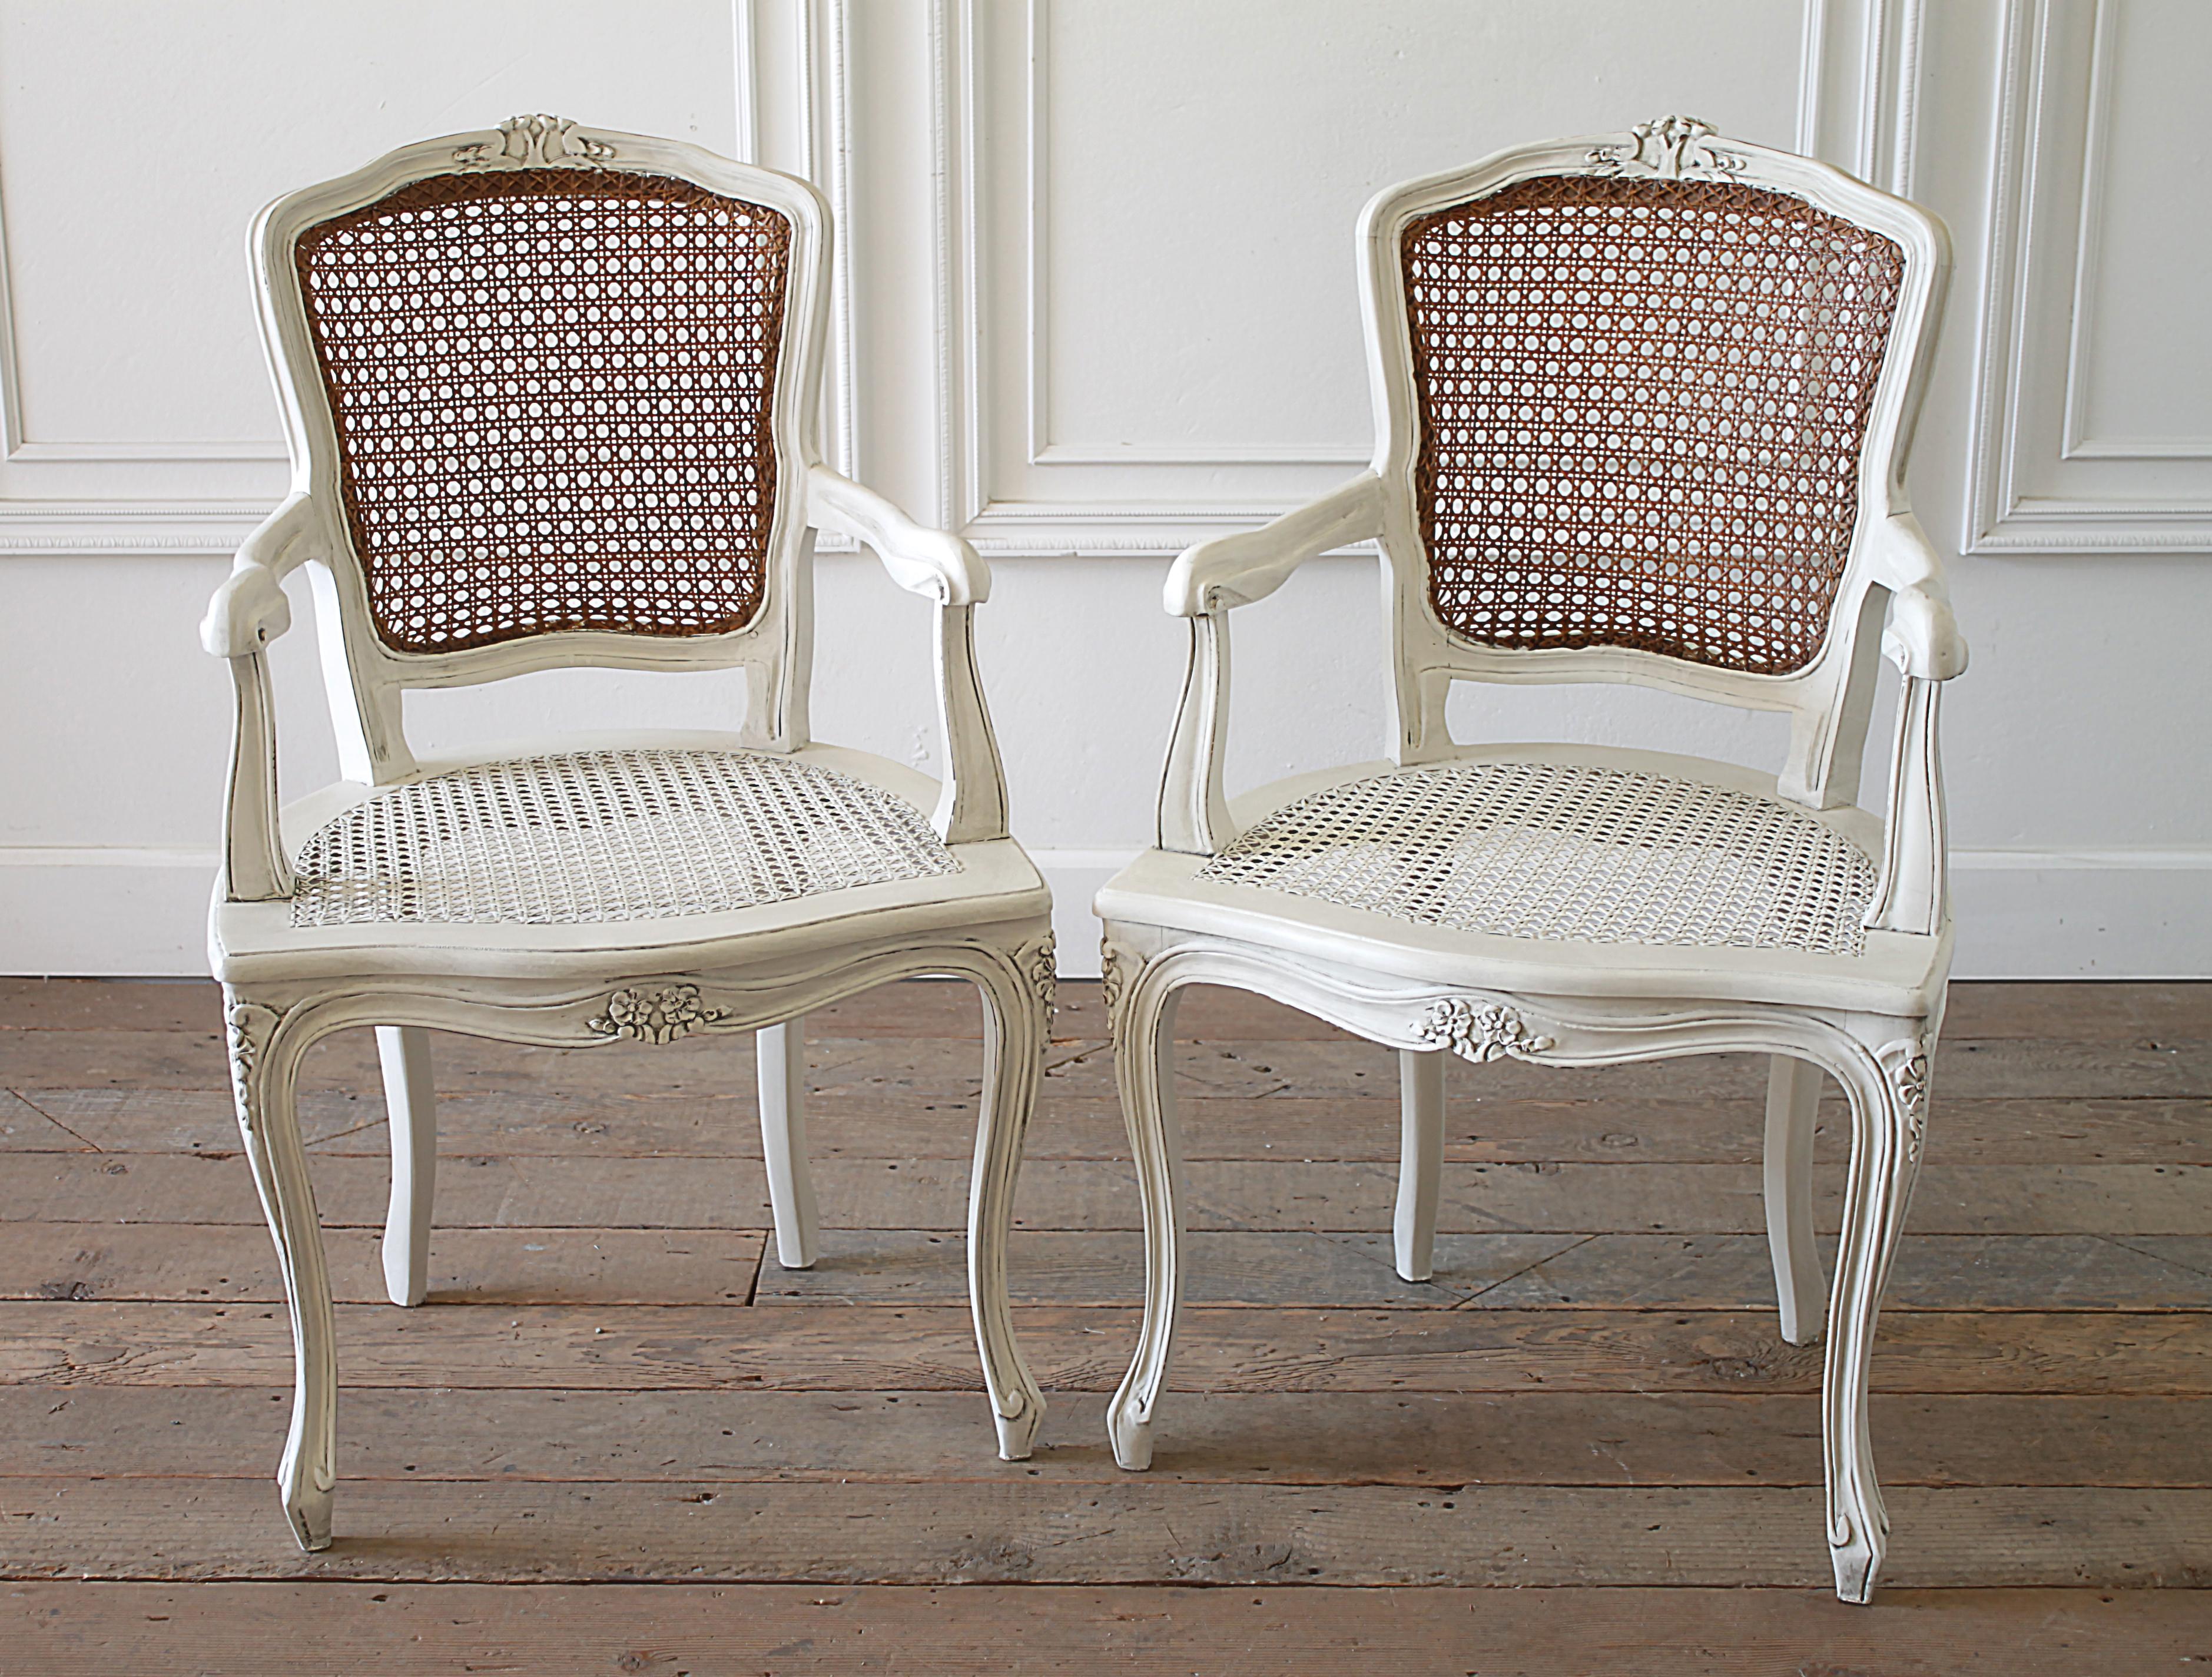 20th century pair of painted cane back open armchairs with linen slipcovers
Painted in our oyster white finish with natural original cane backs, we distressed the edges very lightly, and finished with and antique glazed patina. The cane seats are